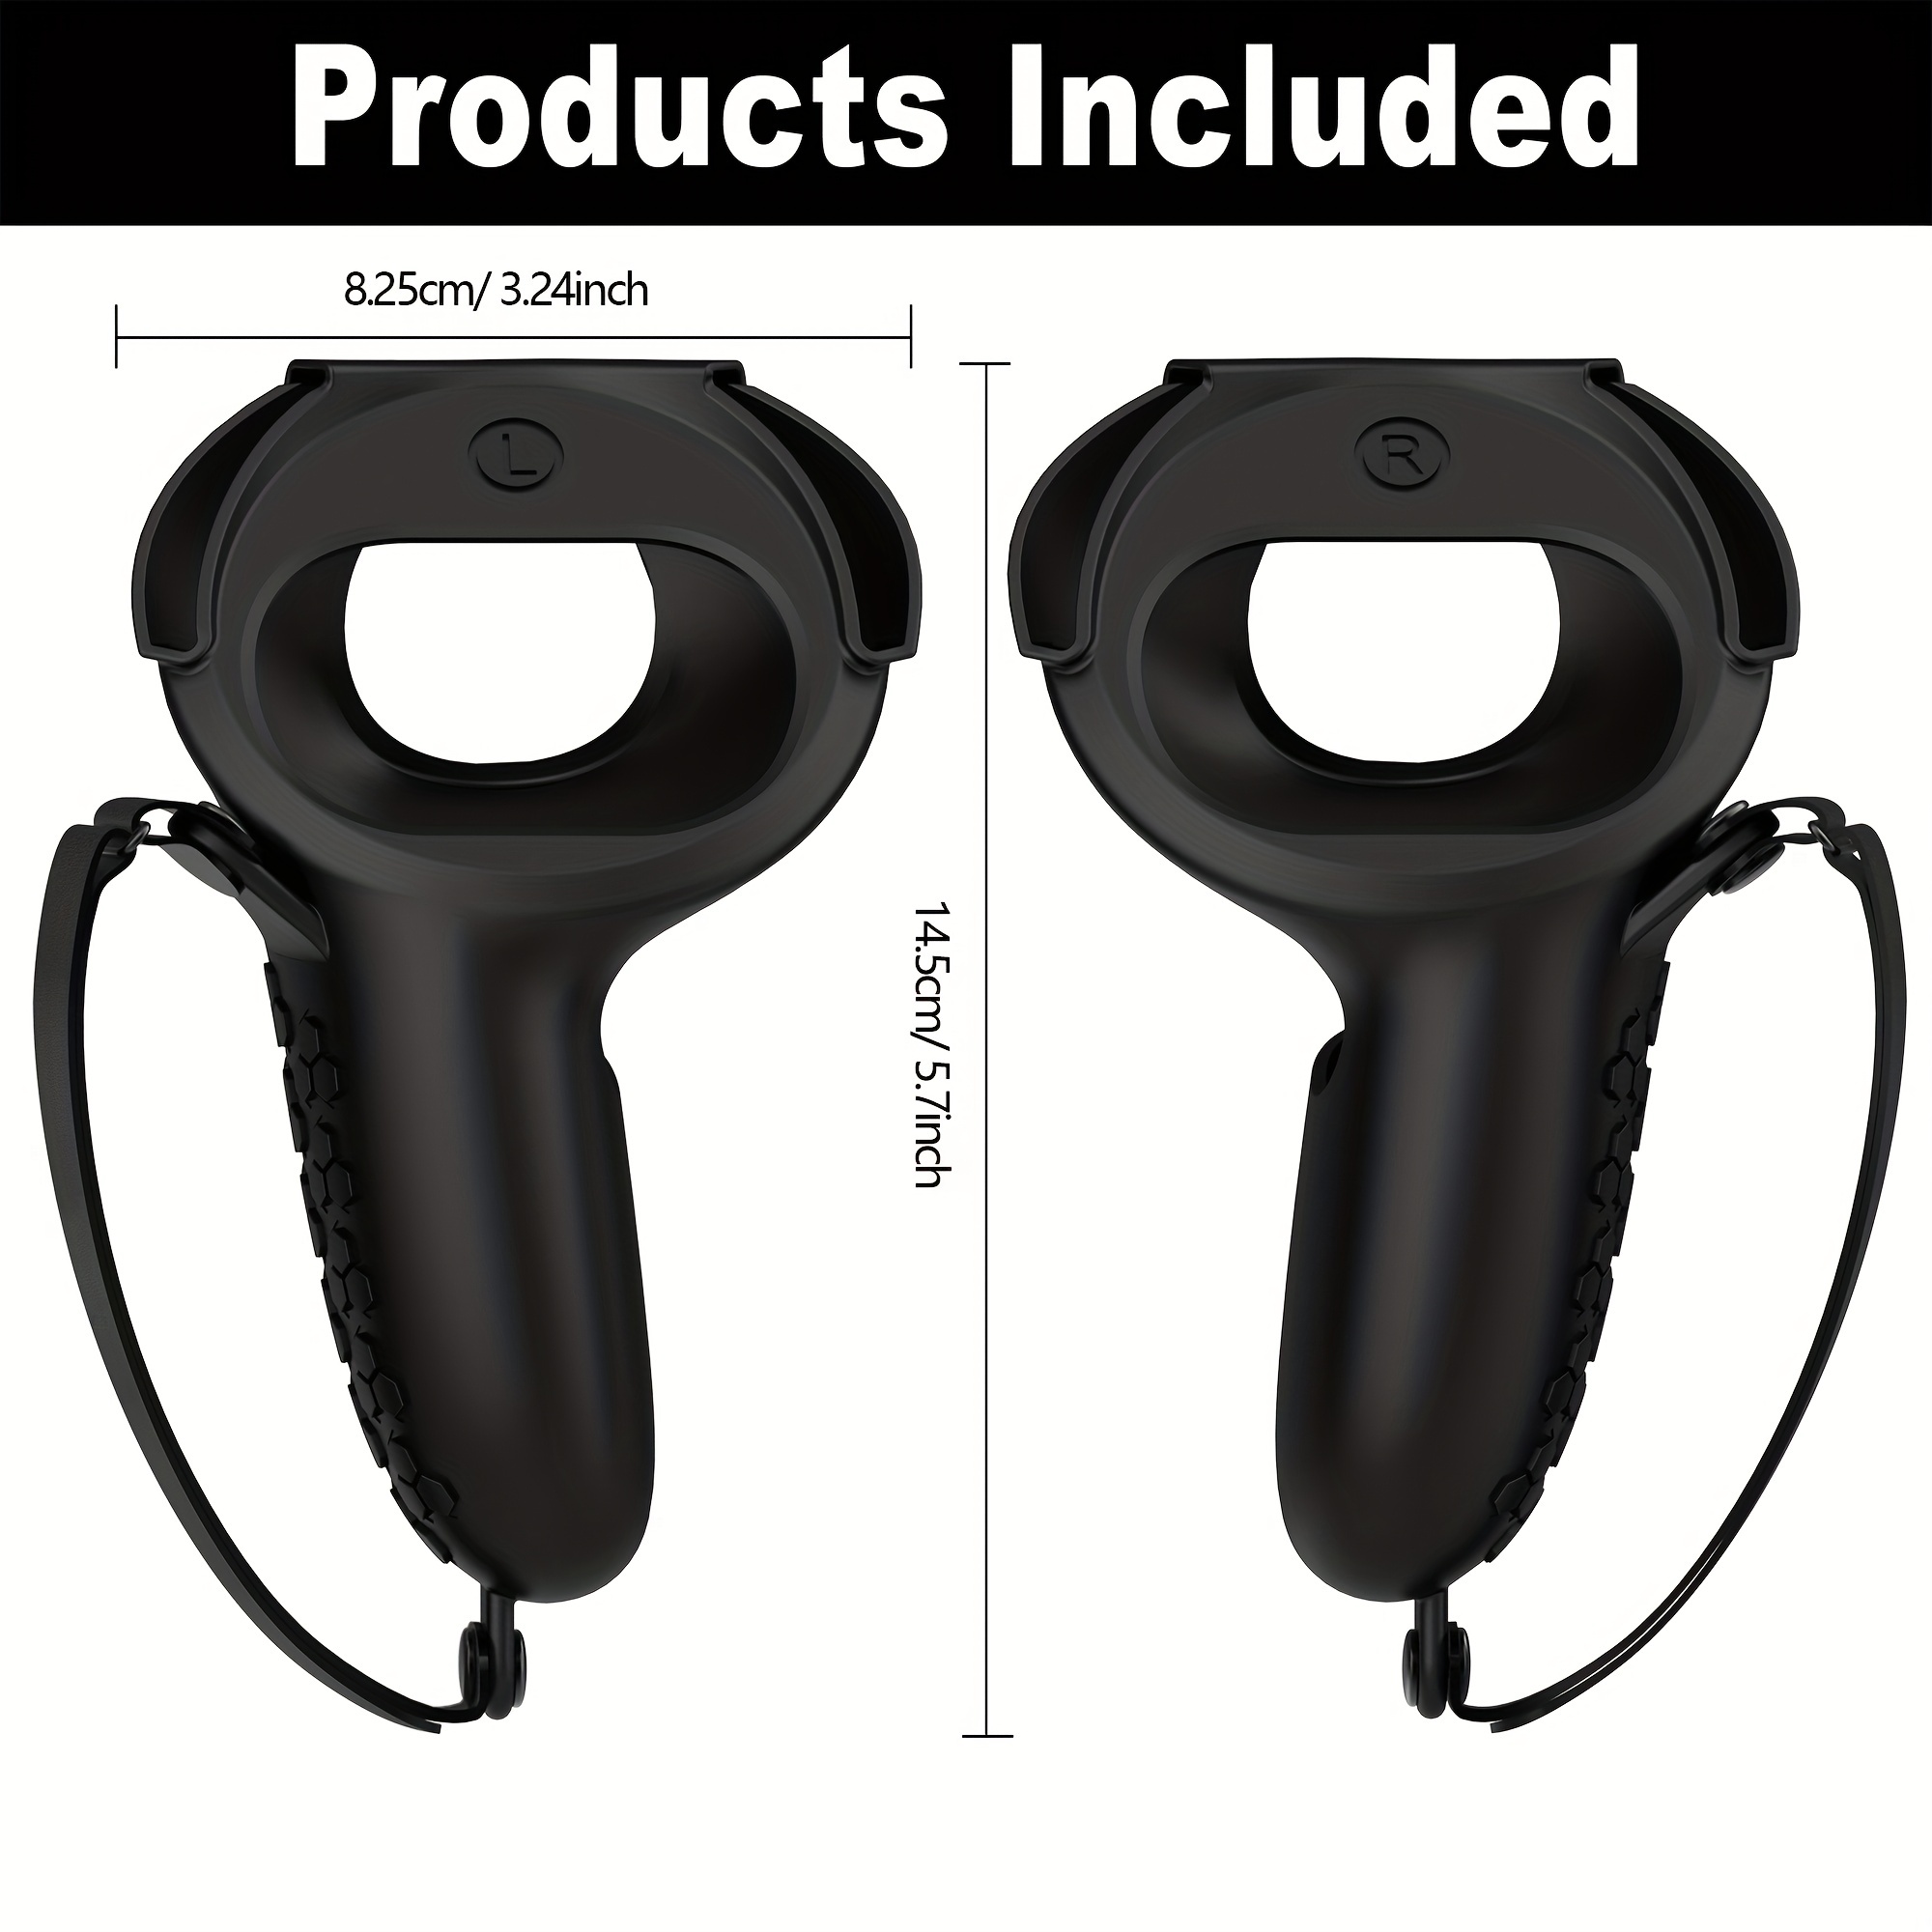 controller grip compatible with quest 2 soft non slip silicone case with adjustable leather knuckle straps vr gaming for quest 2 accessories for quest 2 touch controllers black 1 pair